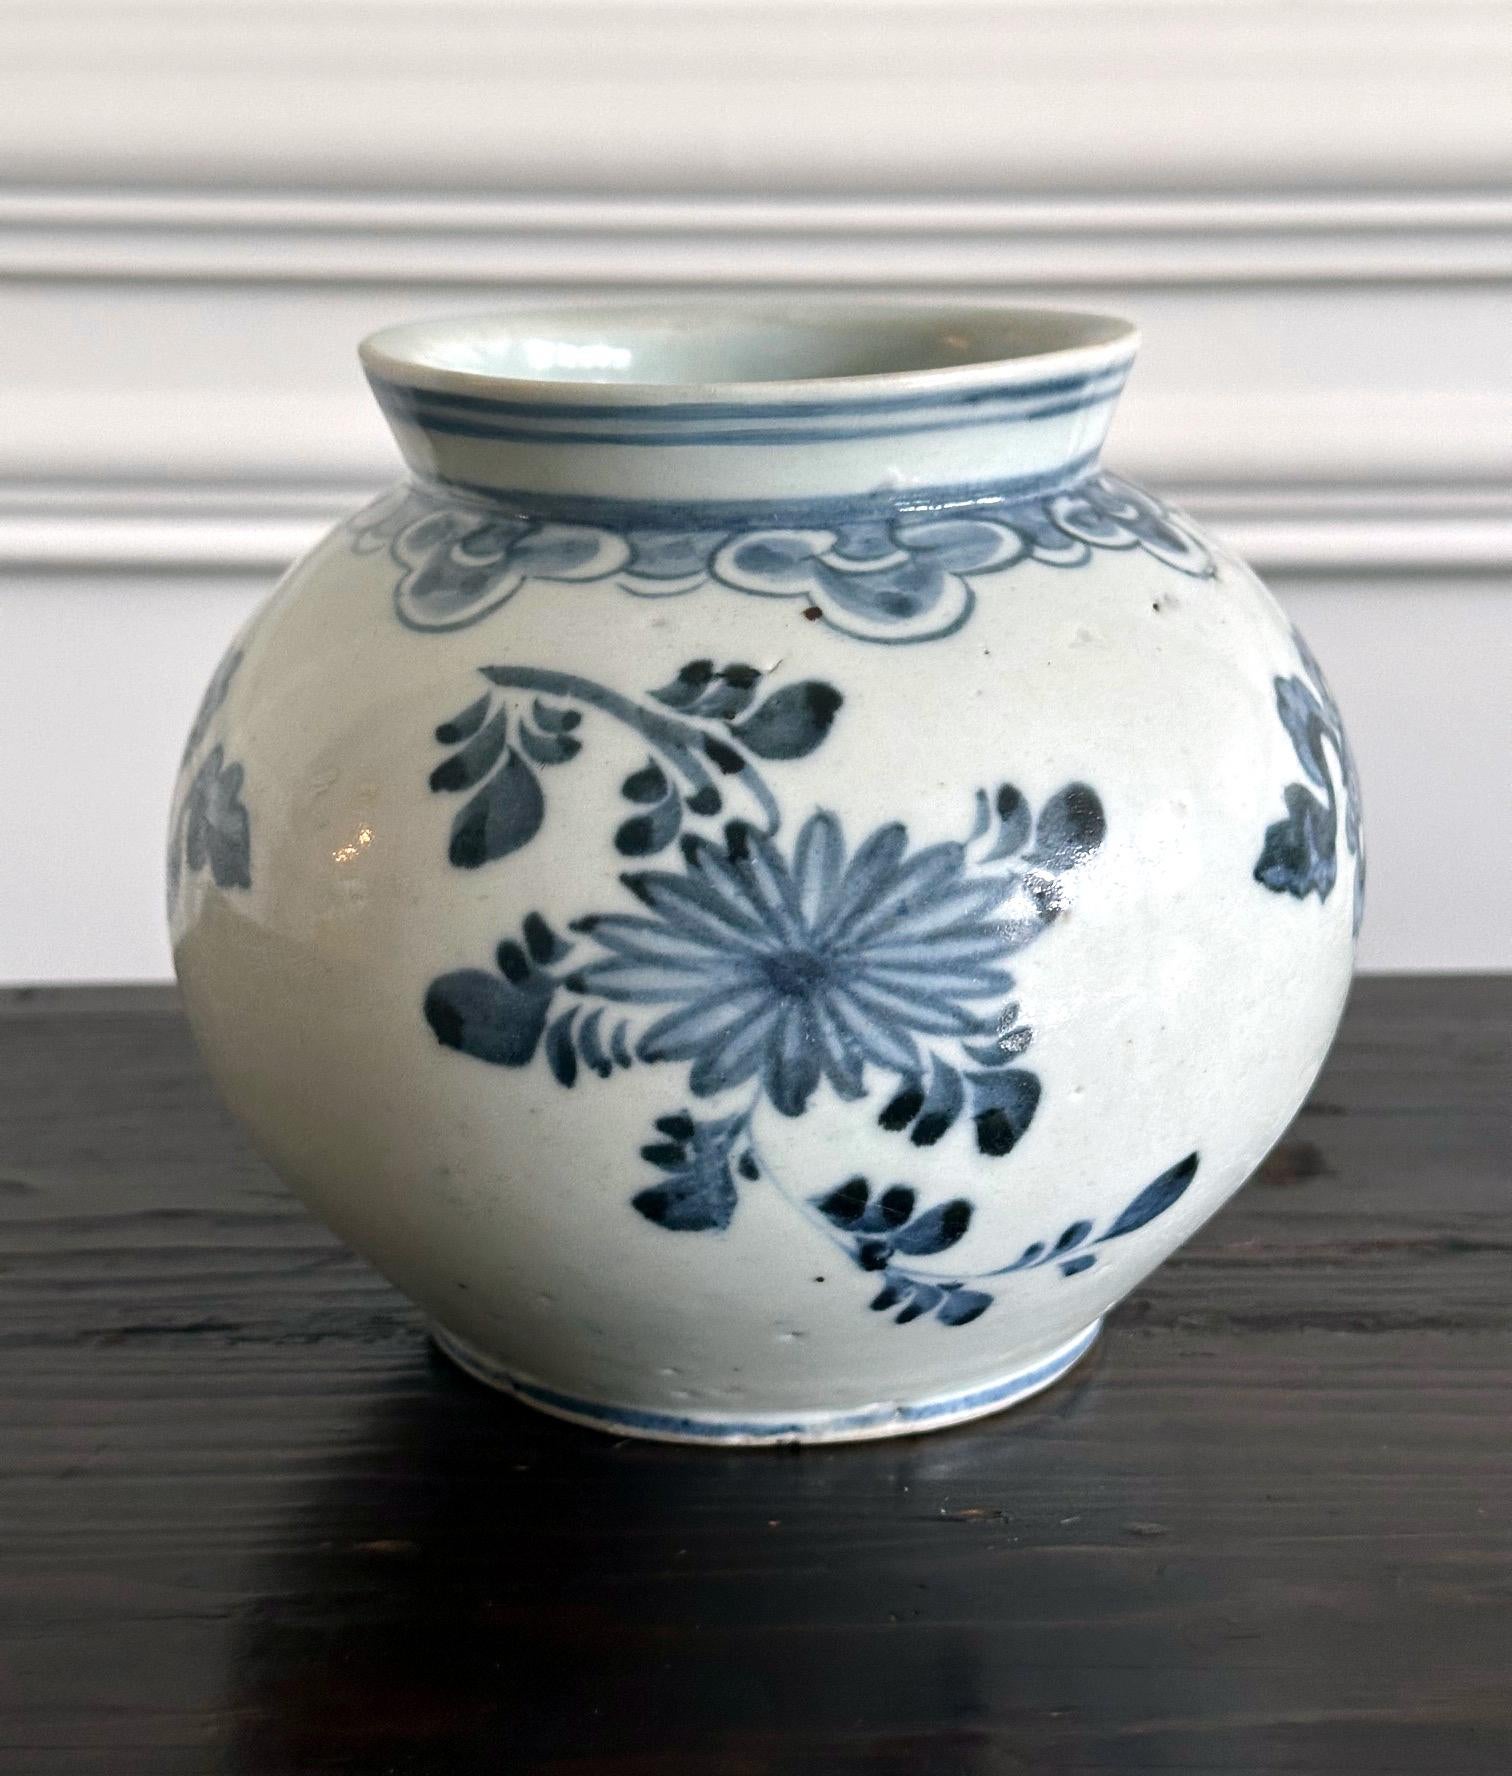 A fine Korean white porcelain jar with underglaze blue painting circa second half of 19th century, Joseon Dynasty. Considered associated with Punwon-ri kilns in Gwangju, these types of globular jar with large mouth on a short near-straight neck were